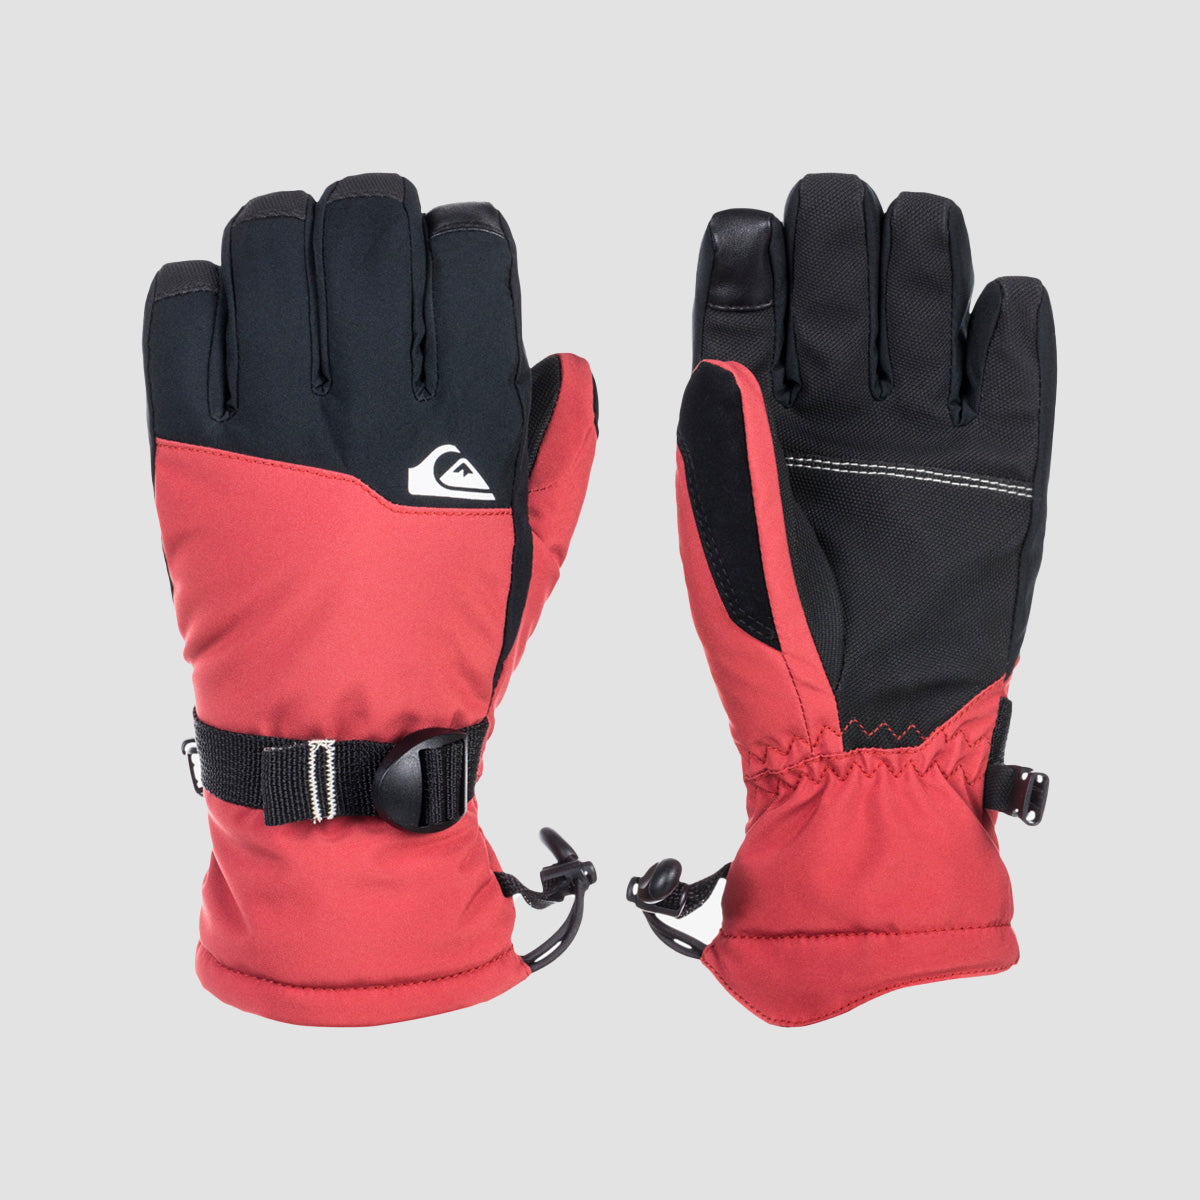 Quiksilver Mission Snow Gloves 8-16 Years Marsala - Kids